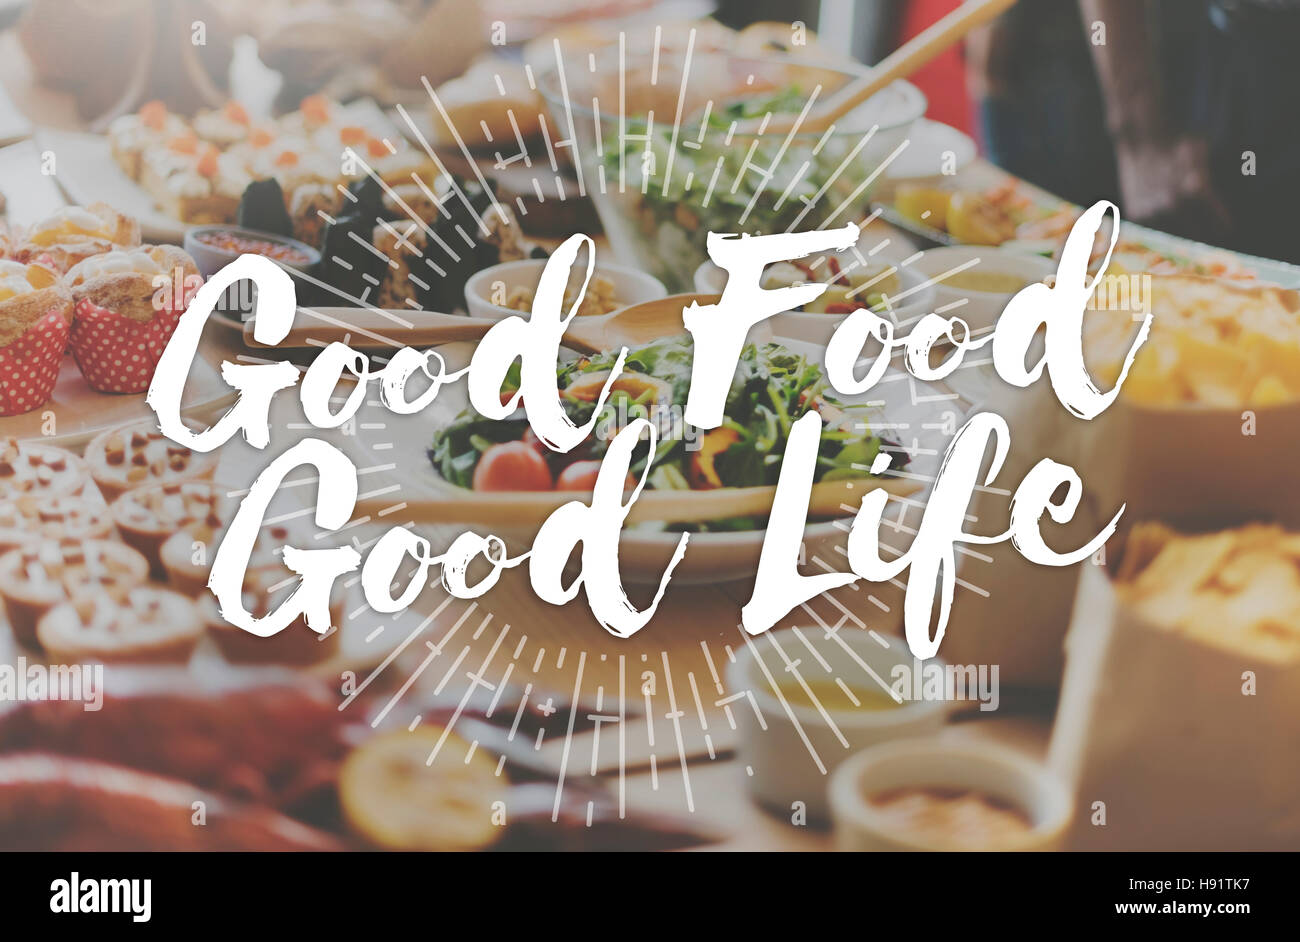 Good Food Good Life Gourmet Cuisine Catering Culinary Concept Stock Photo